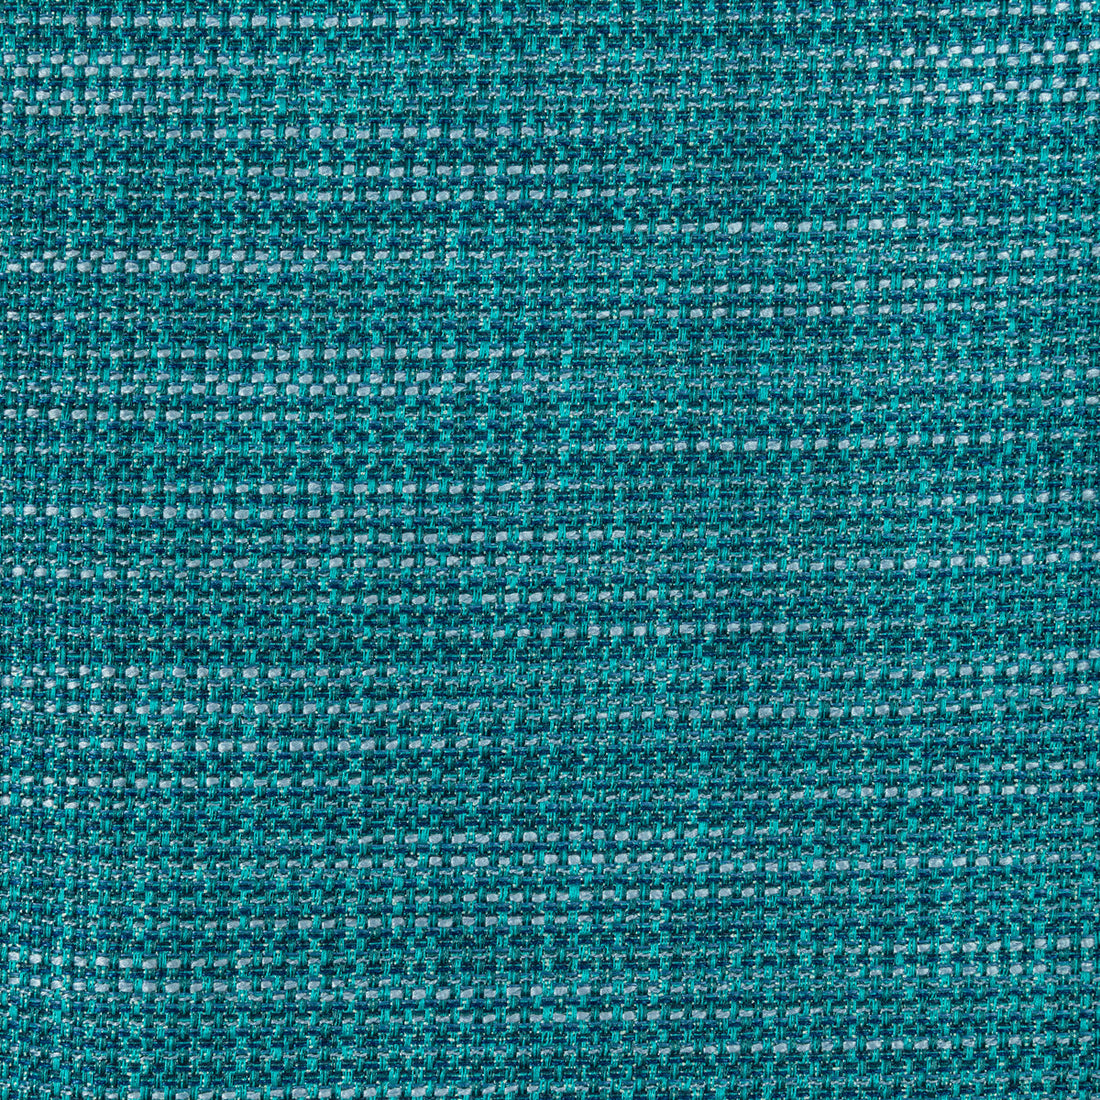 Luma Texture fabric in cove color - pattern 4947.35.0 - by Kravet Contract in the Fr Window Luma Texture collection